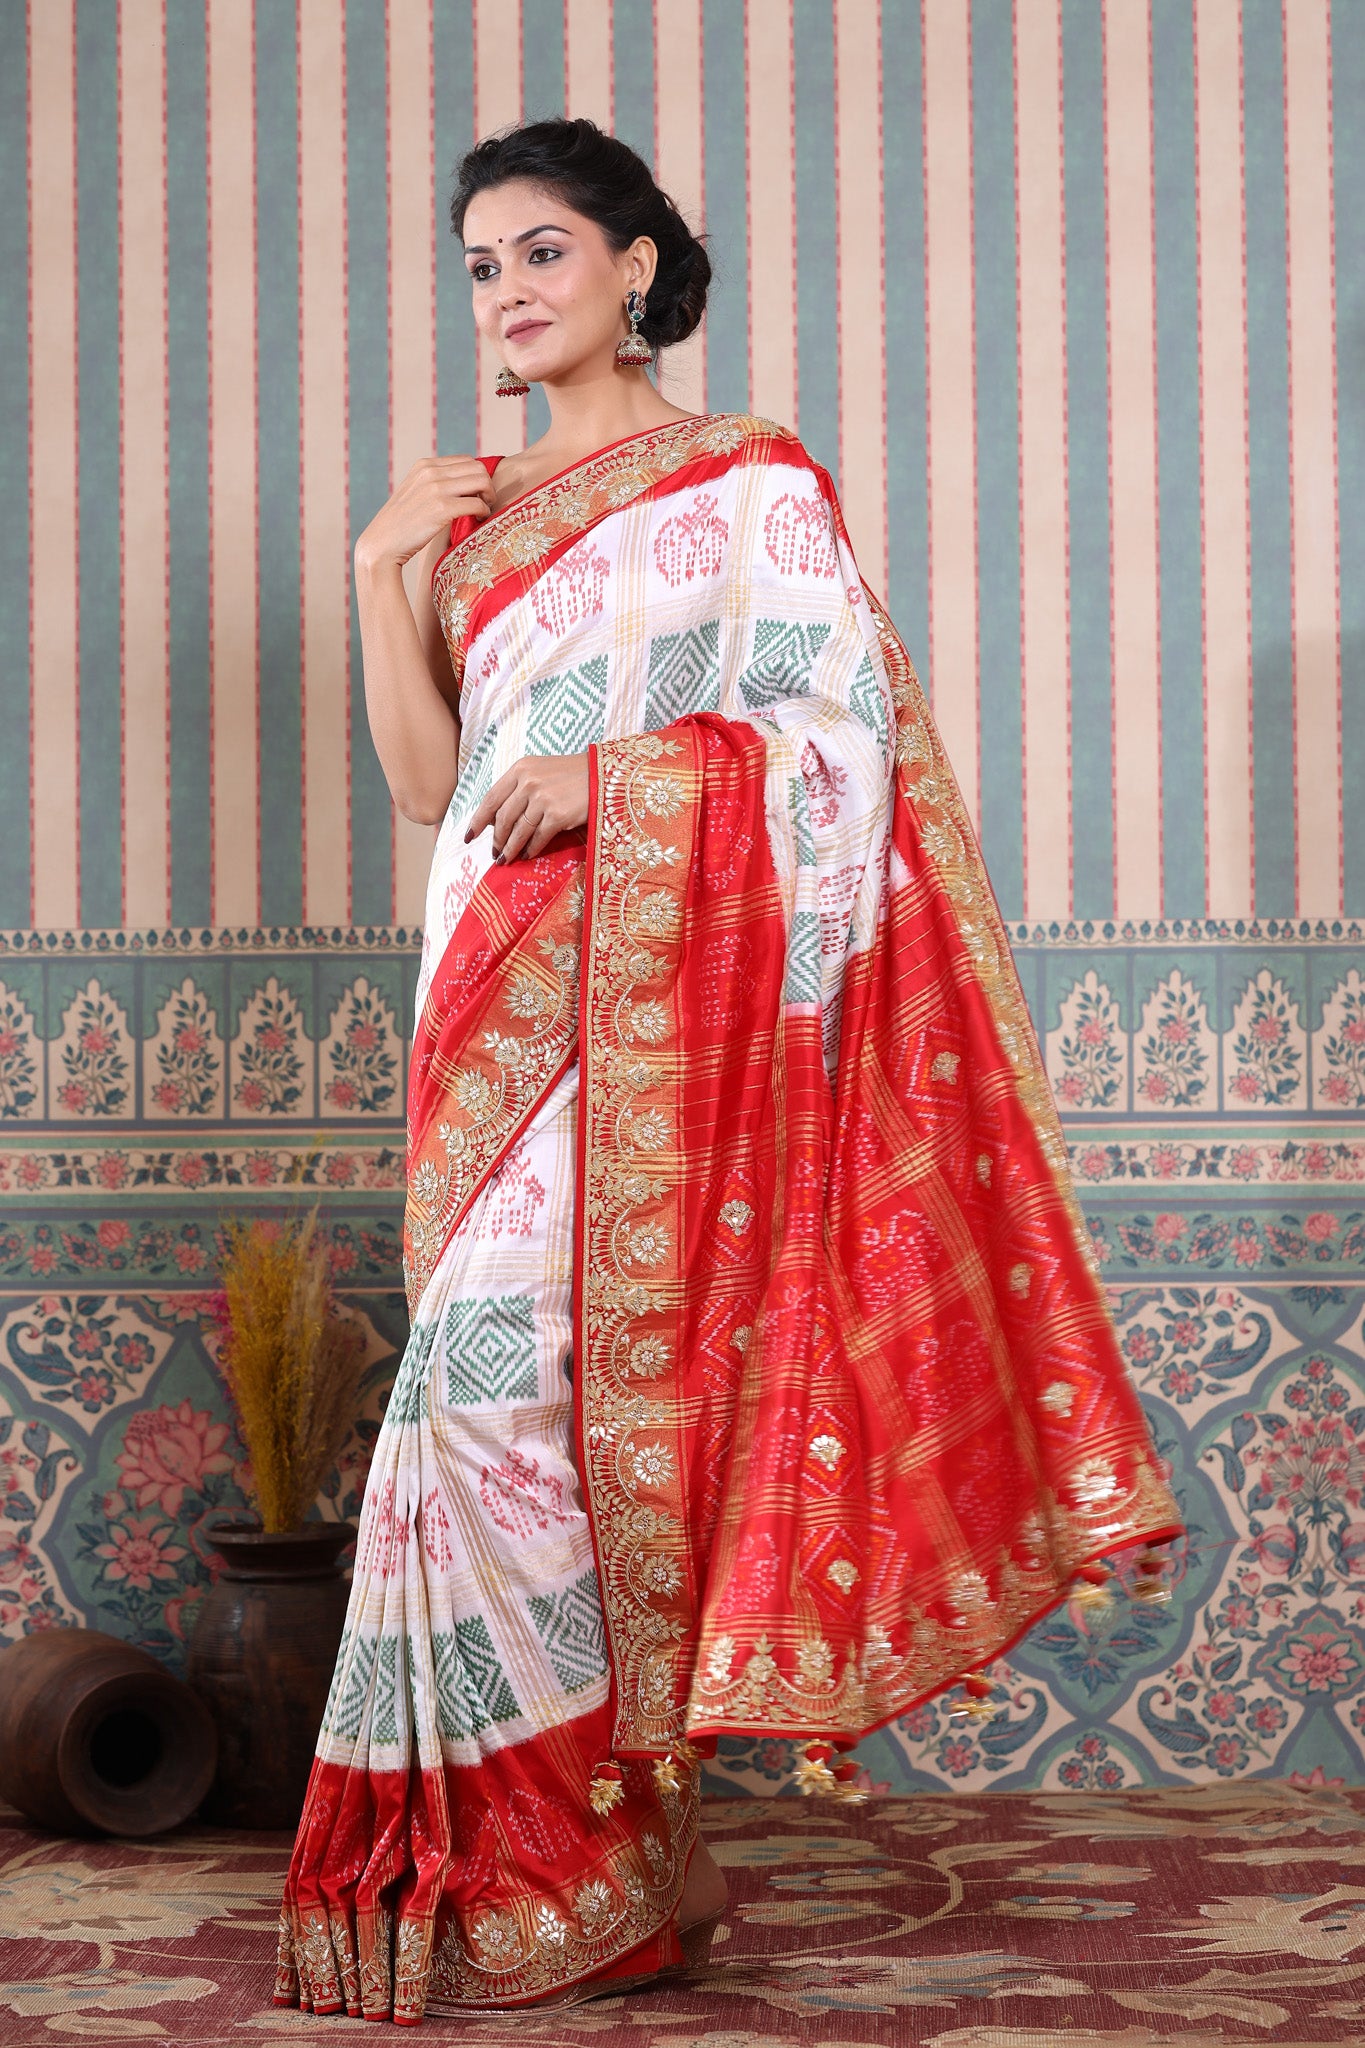 Buy beautiful white Patola silk sari online in USA with red embroidered border. Make a fashion statement at weddings with stunning designer sarees, embroidered sarees with blouse, wedding sarees, handloom sarees from Pure Elegance Indian fashion store in USA.-pallu